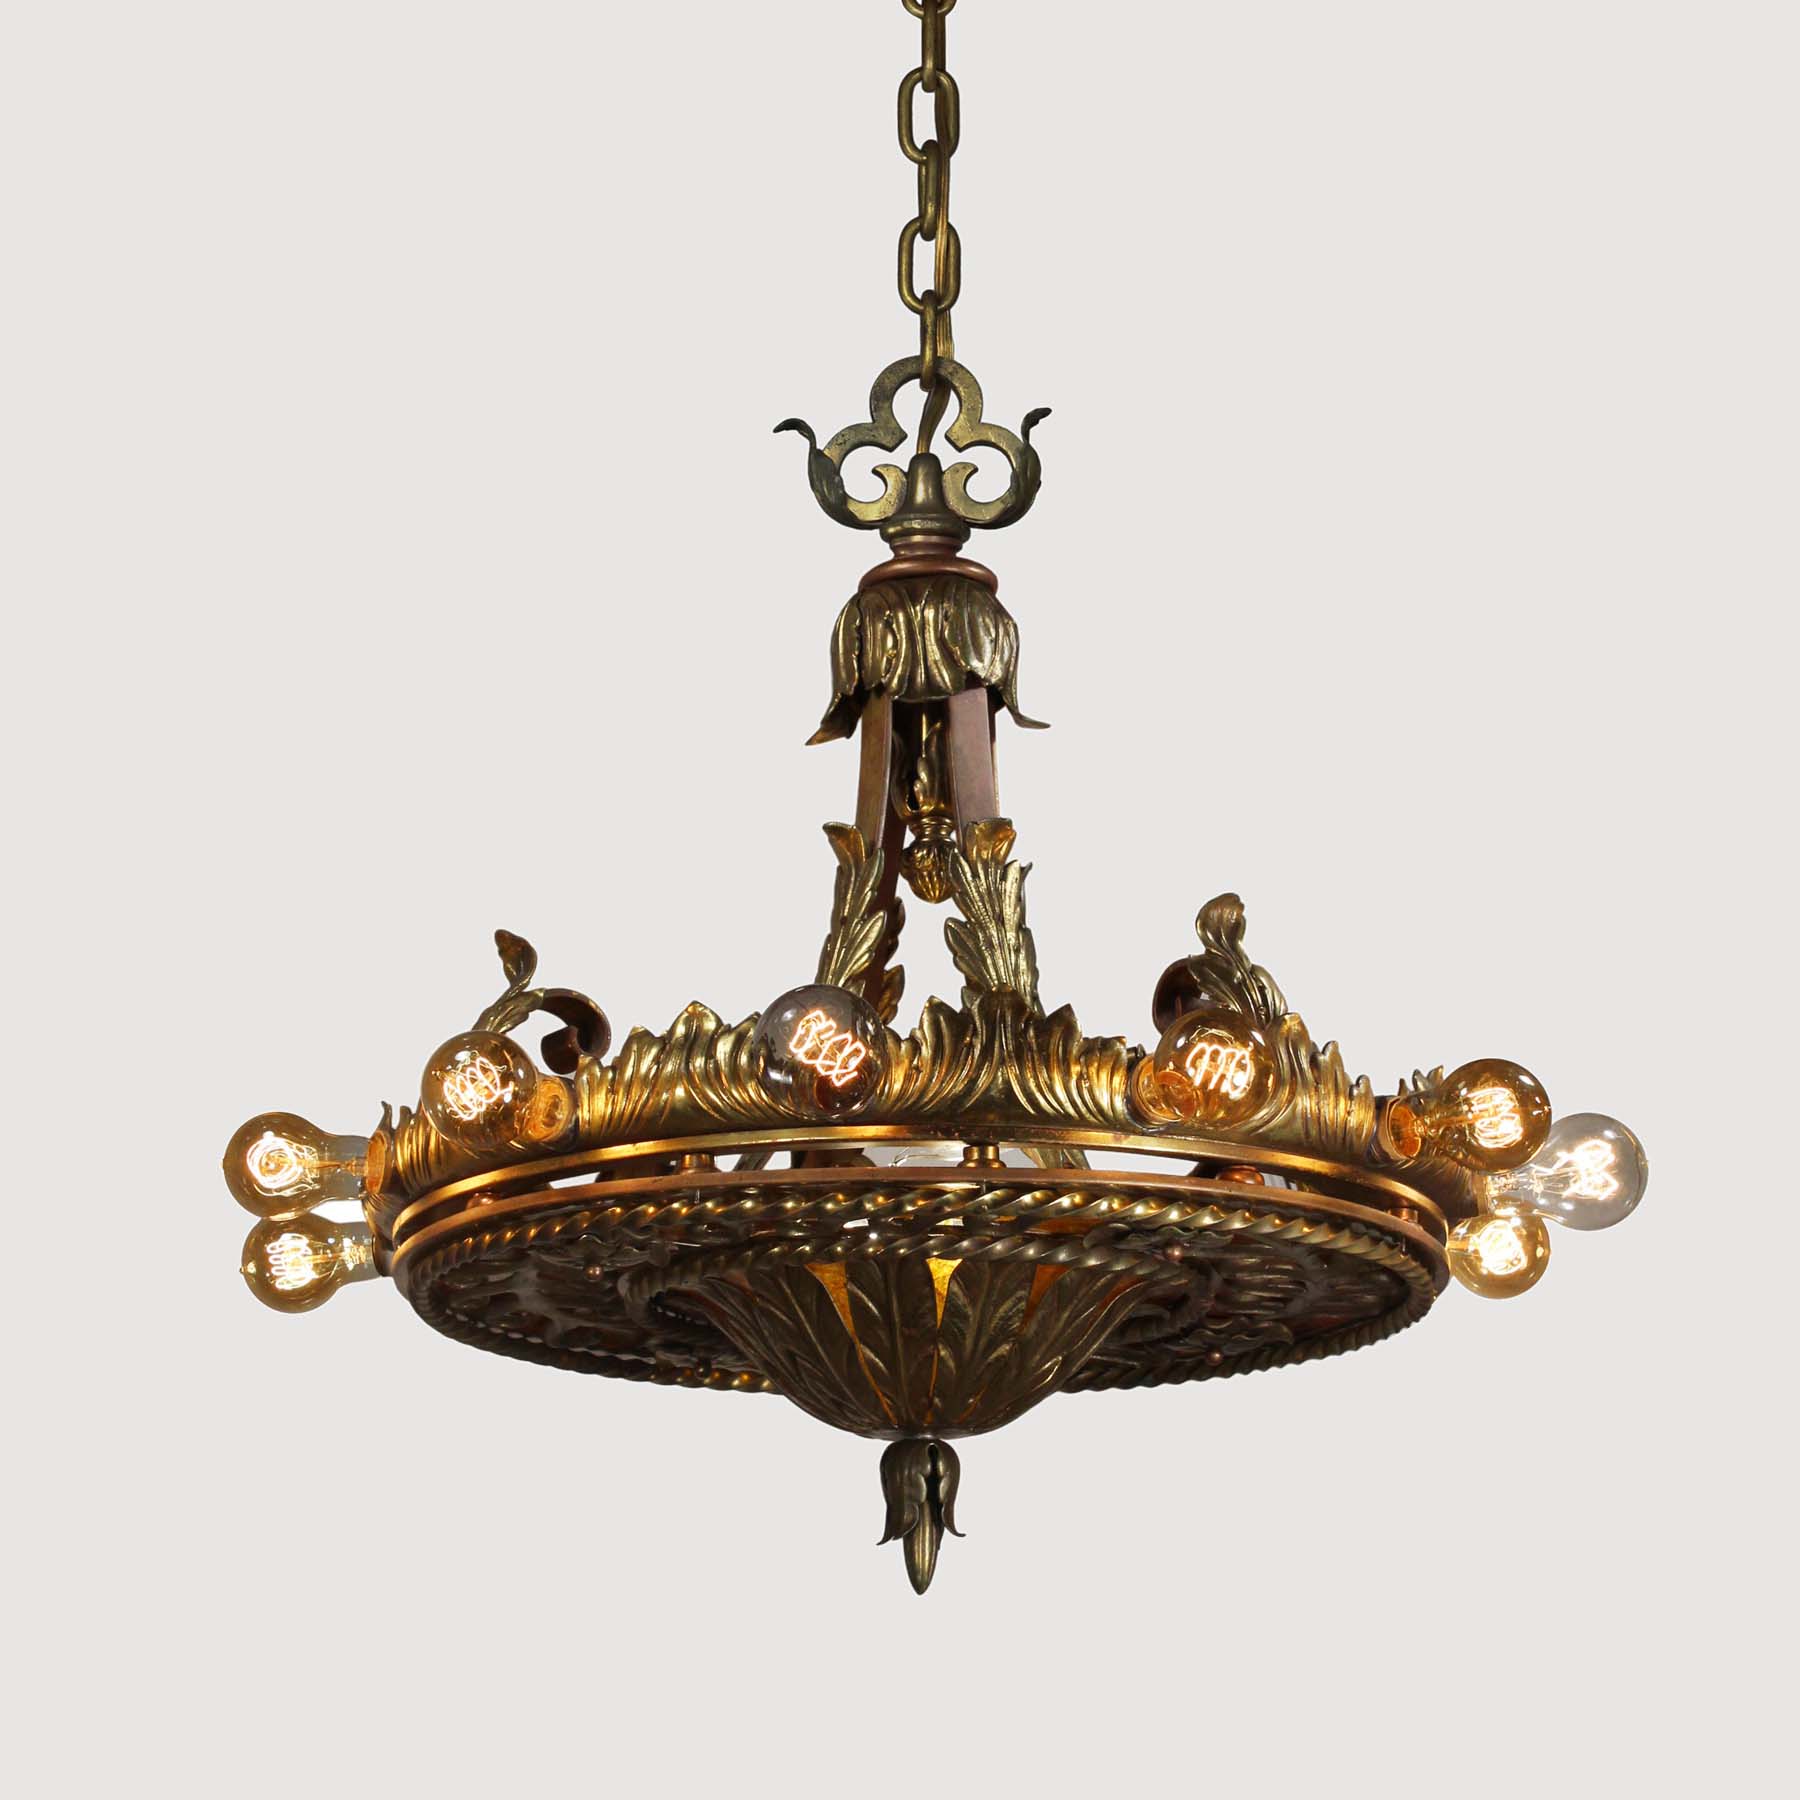 SOLD Substantial Antique Brass Chandelier with Mica -69296